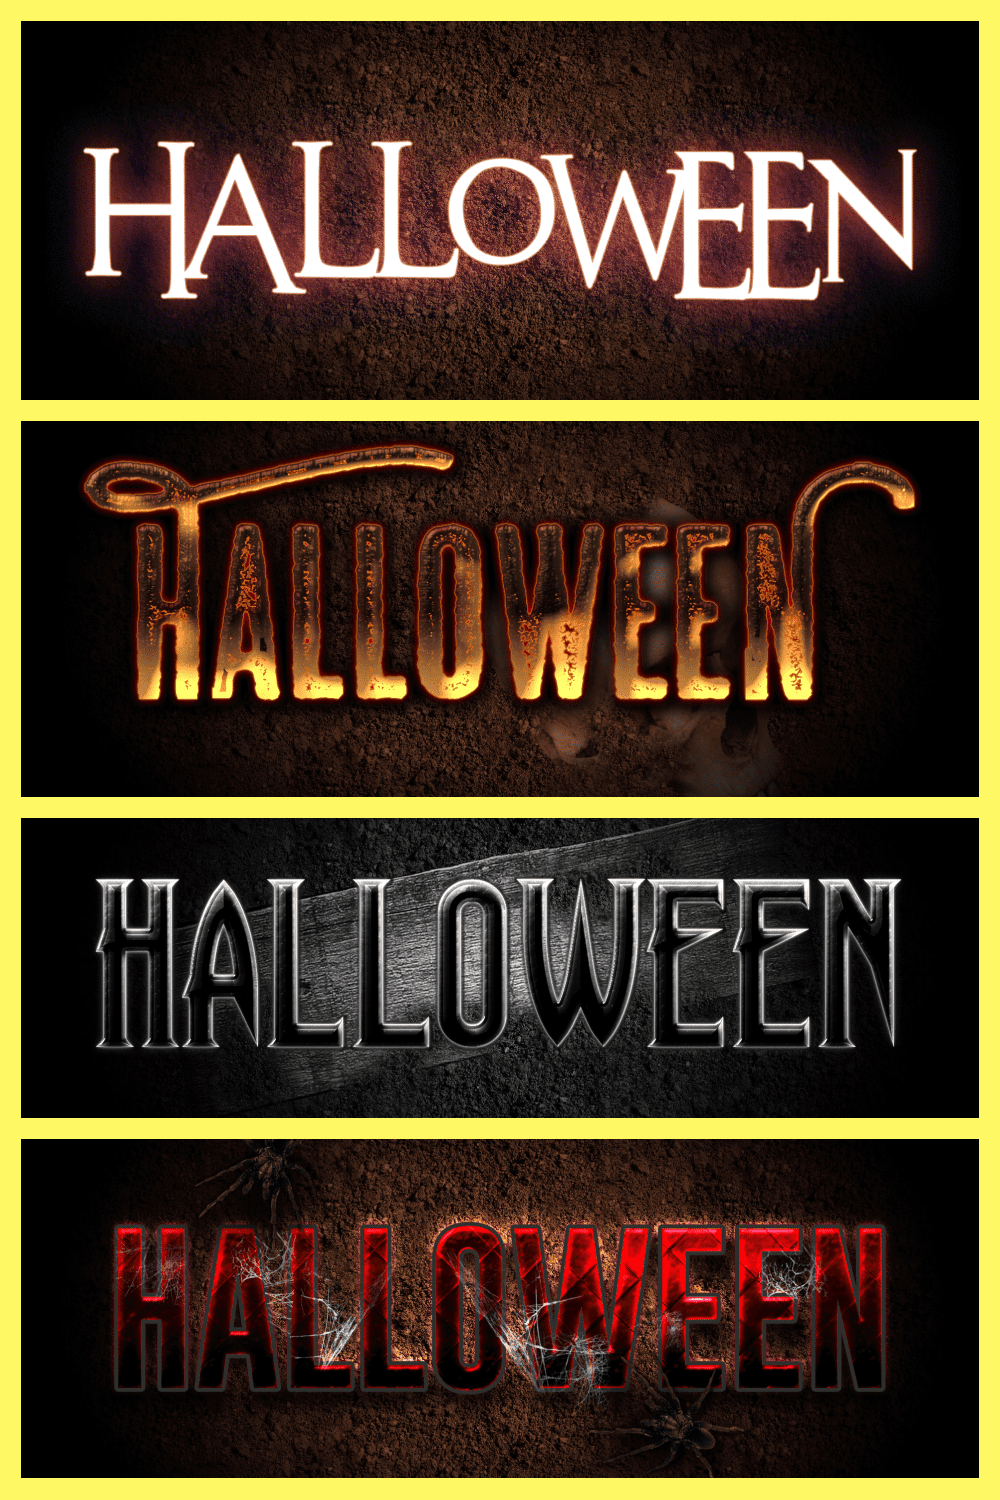 A variety of glowing and neon fonts for Halloween.